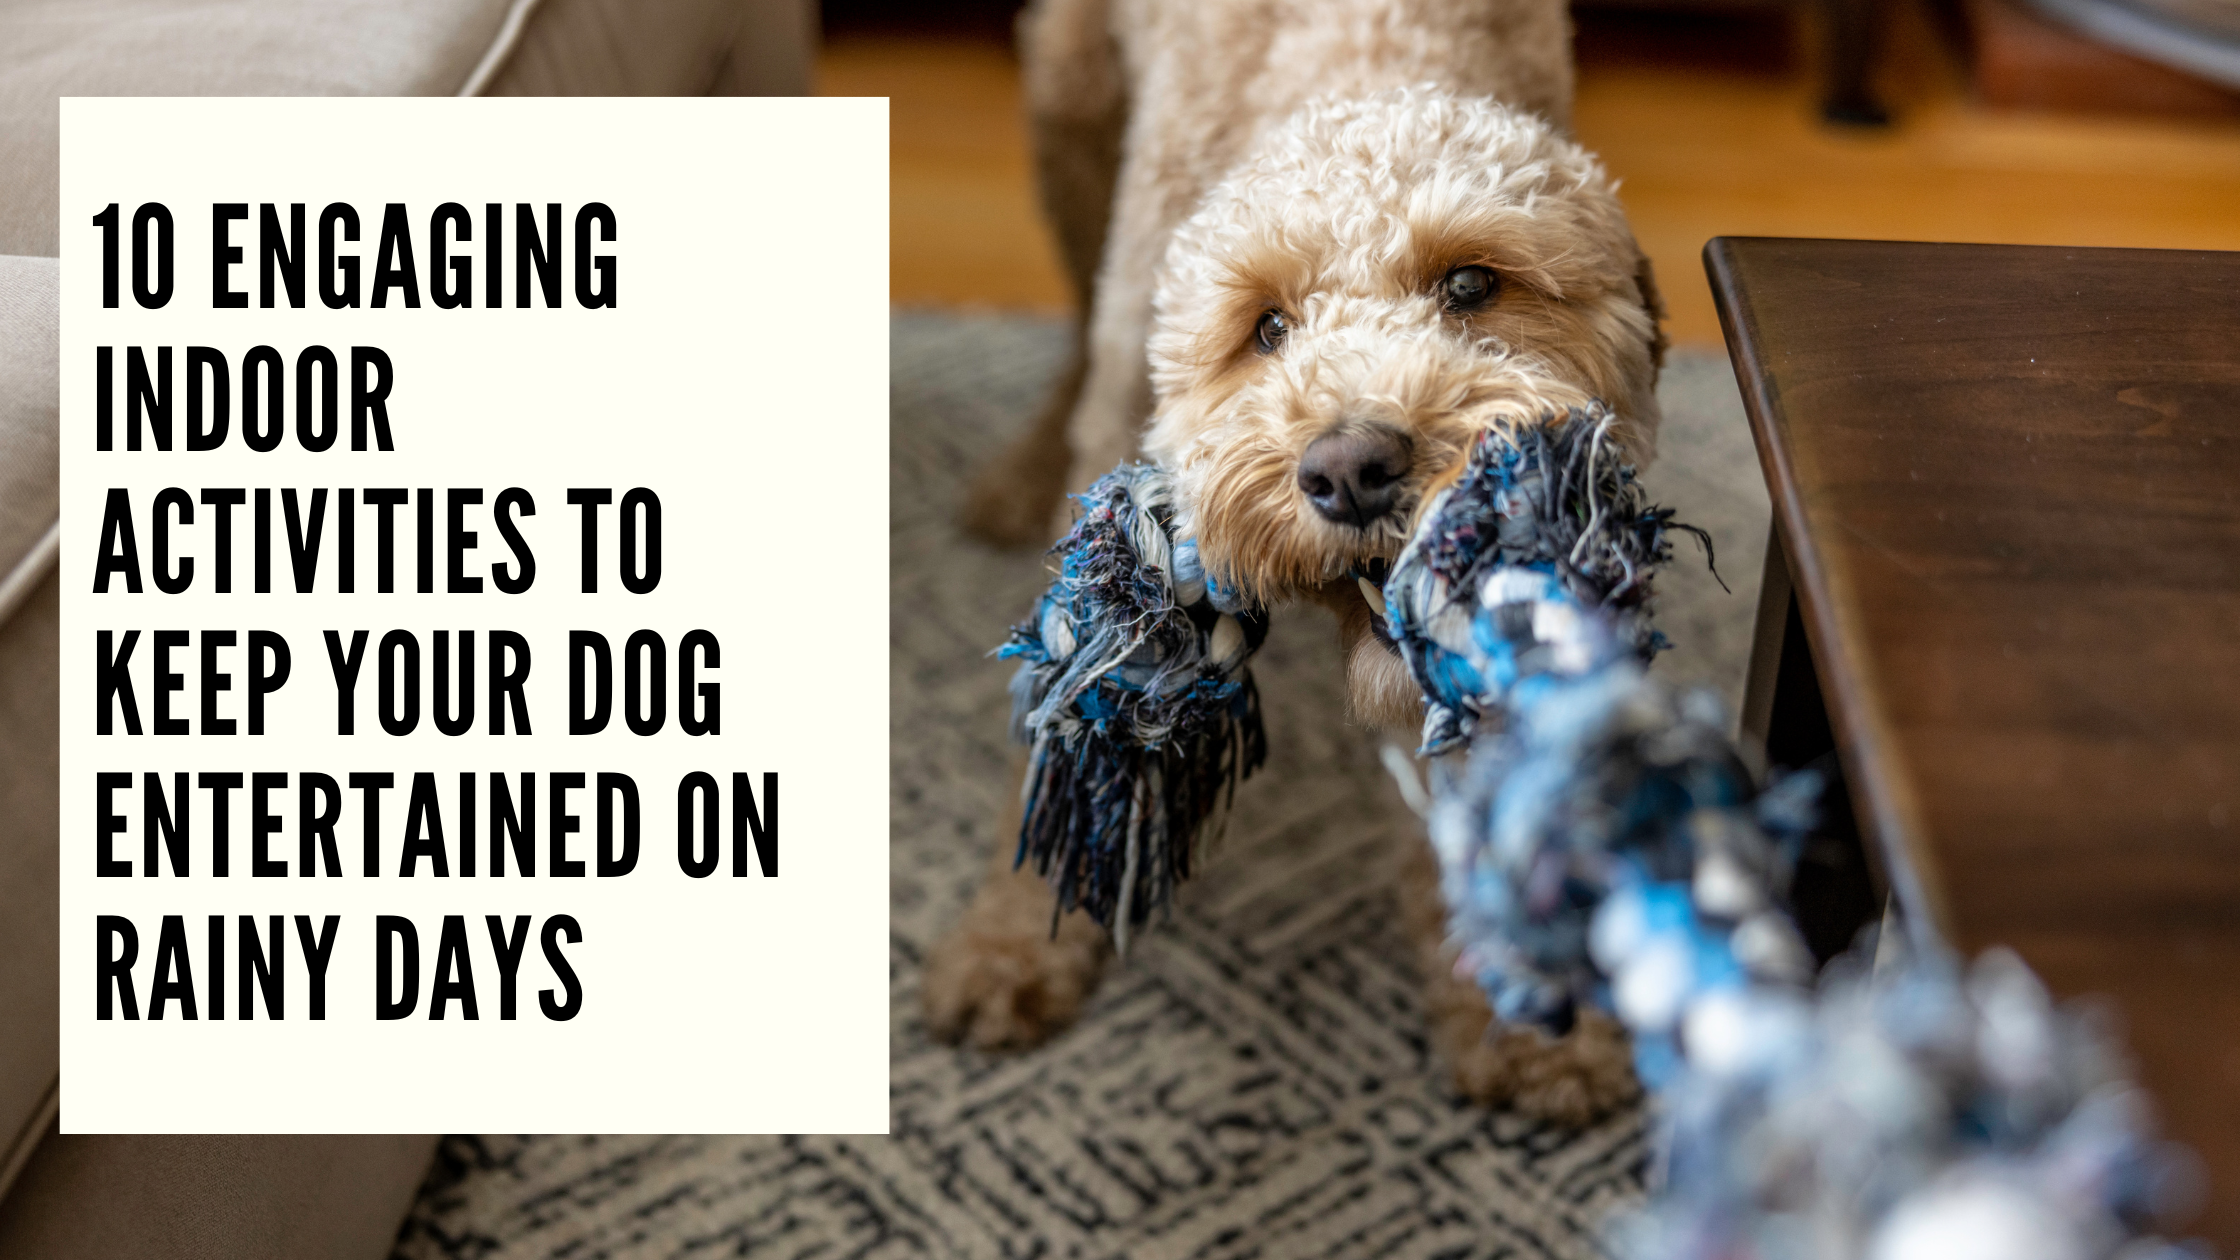 10 Engaging Indoor Activities to Keep Your Dog Entertained on Rainy Days